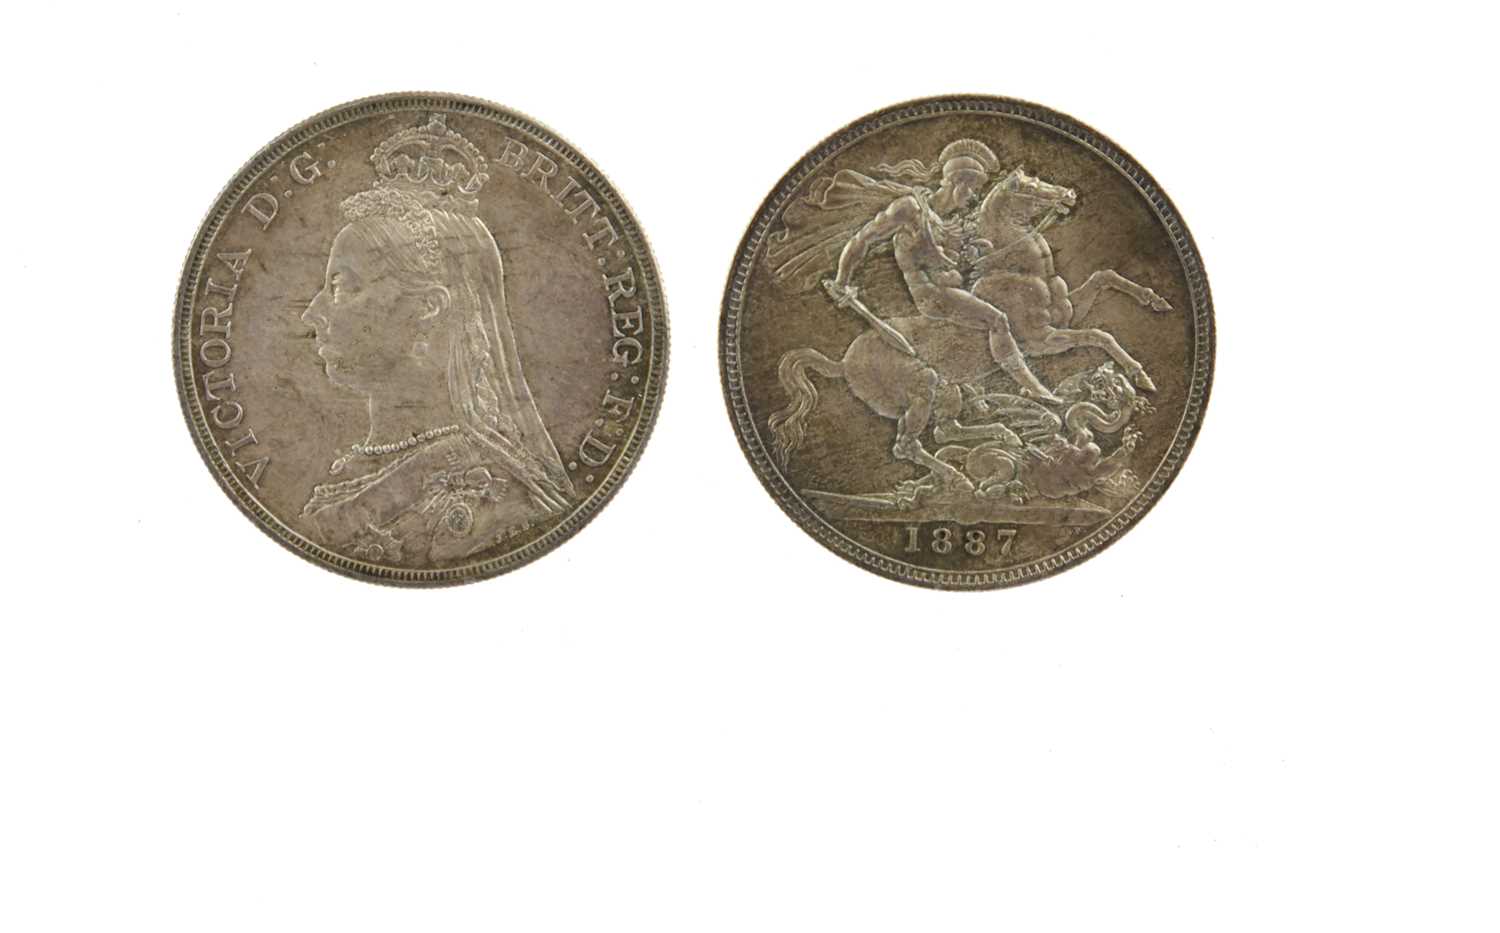 Victoria, silver crown, 1887, Jubilee coinage (S 3921), at least extremely fine. 28.28mm diameter